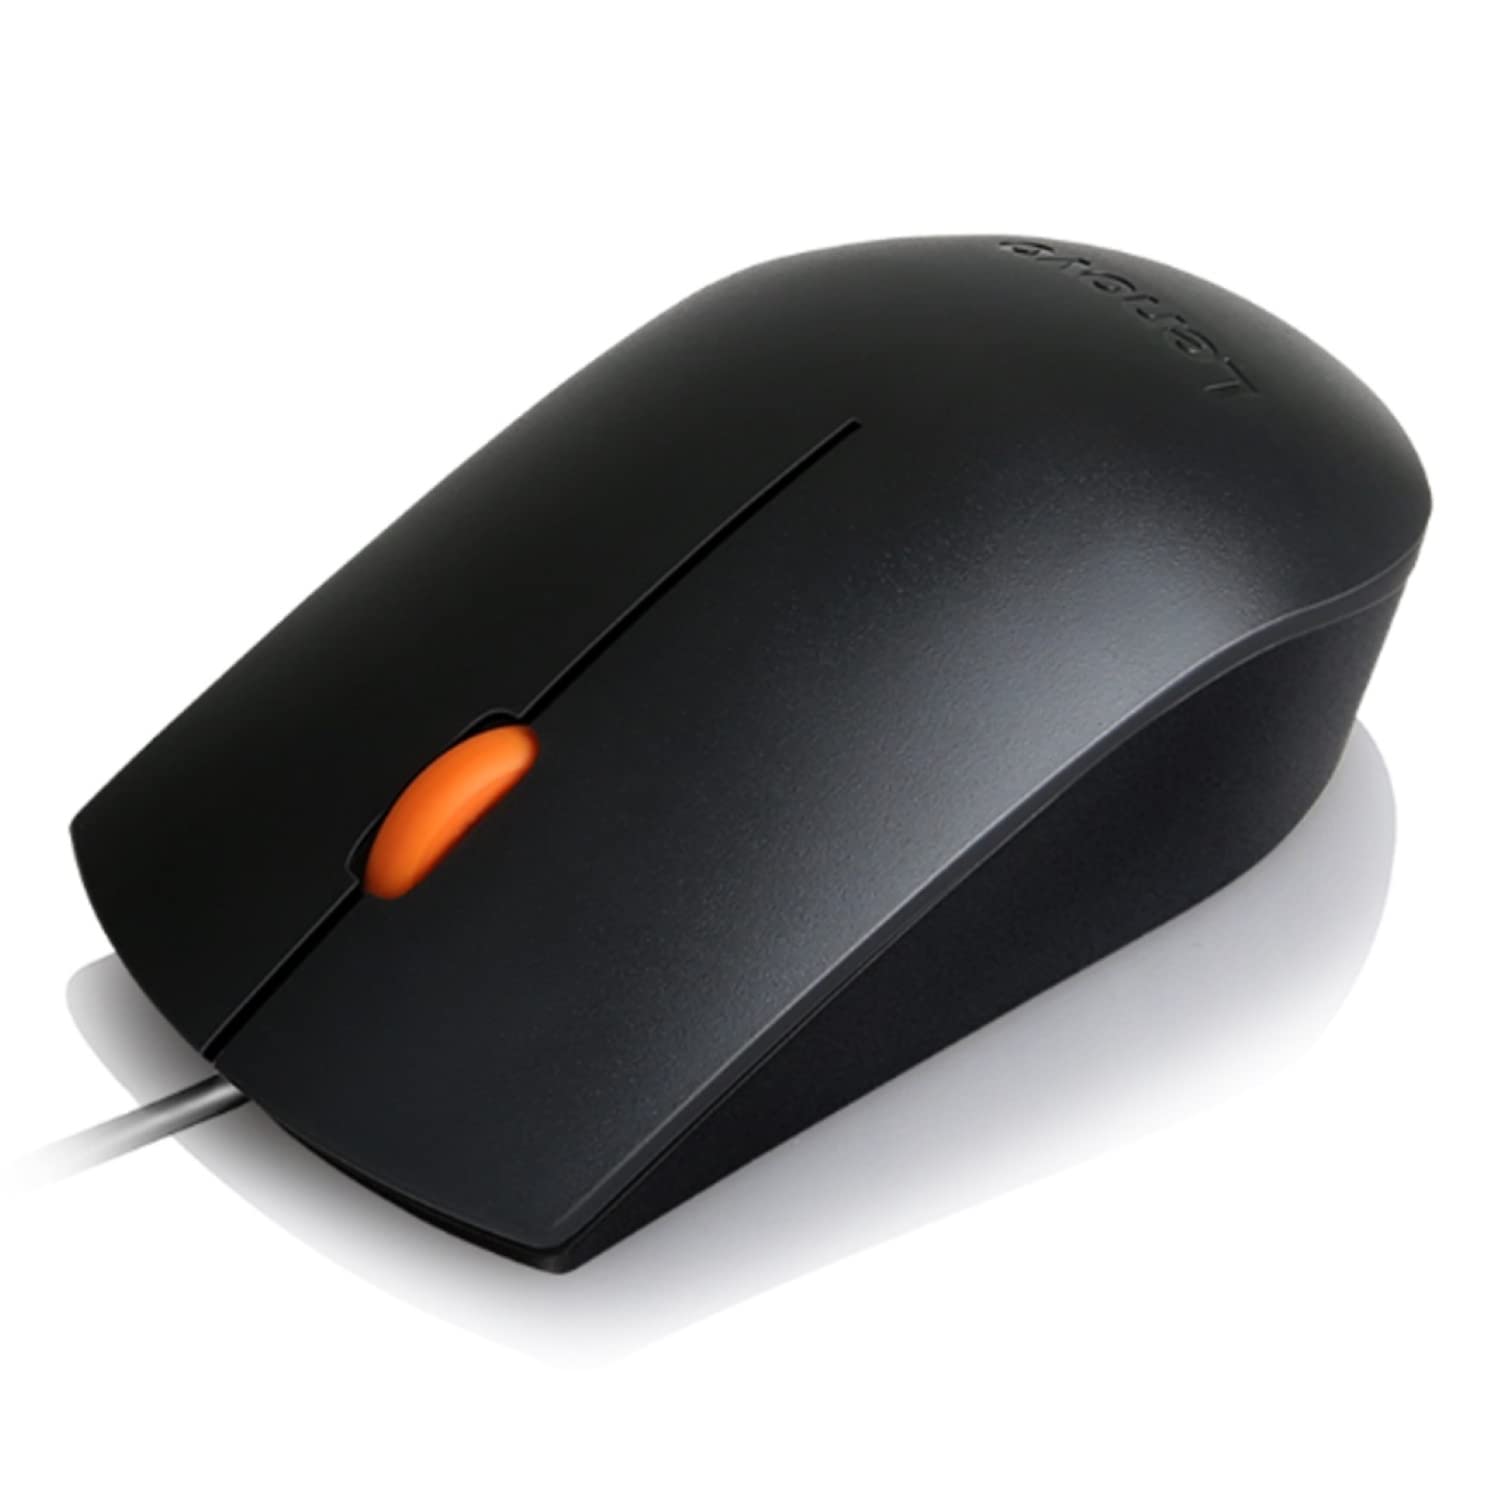 2-Pack Lenovo 300 Wired USB Mouse (Black) $7.98 + Free Shipping w/ Prime or on orders over $35